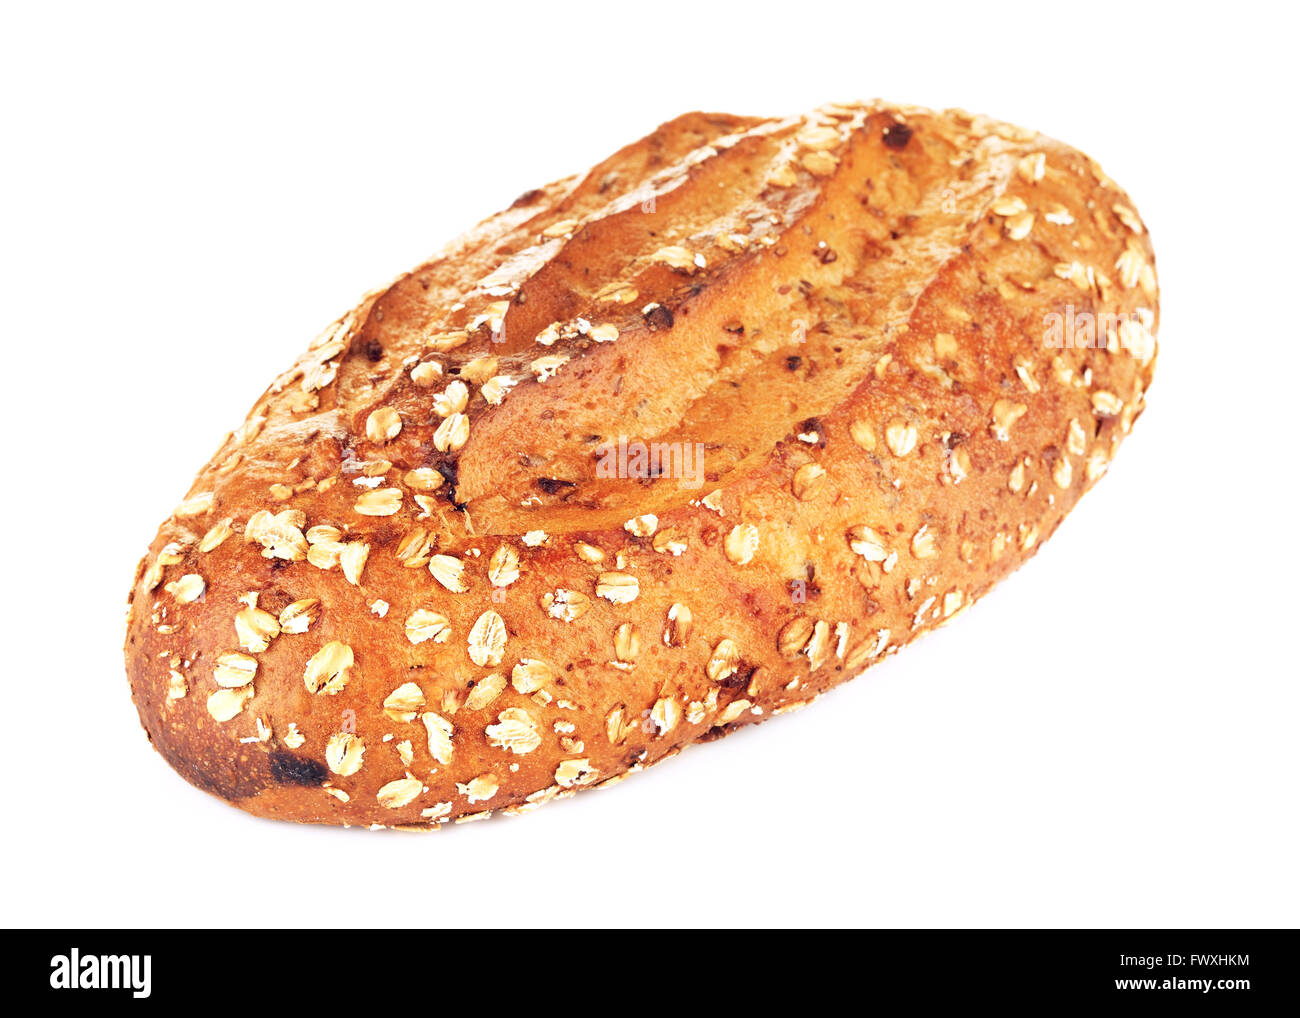 wholegrain bread with oats and nuts, isolated on white background Stock Photo